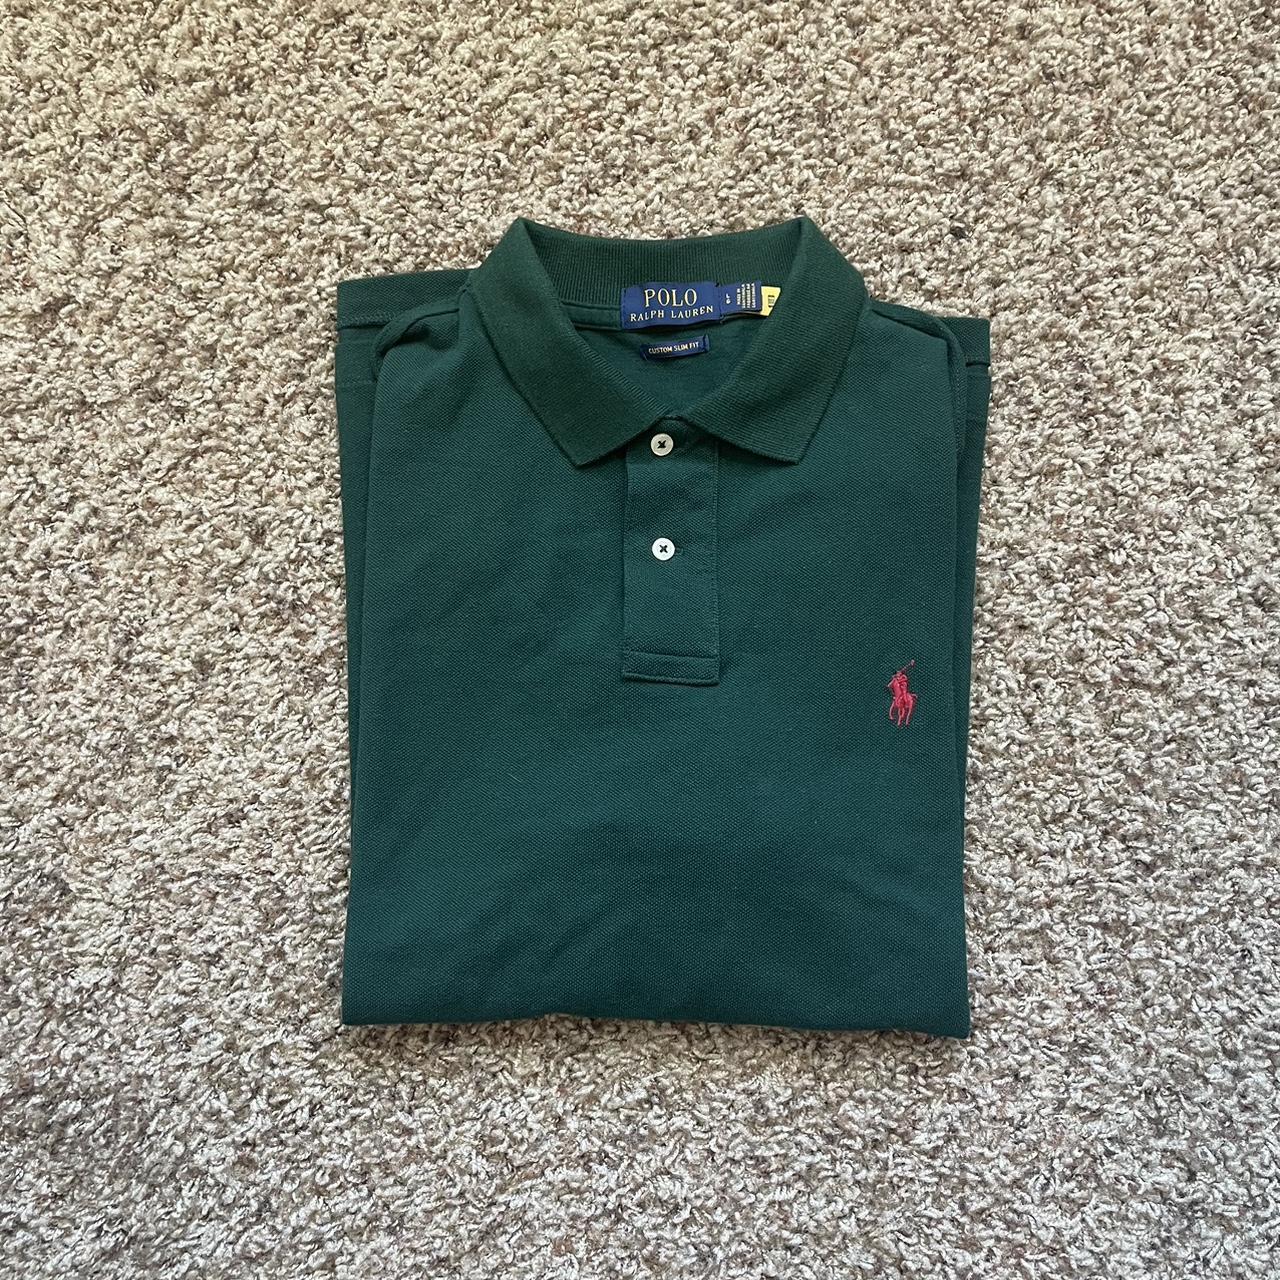 Polo Green Collared Shirt Slim Fit Large Excellent... - Depop